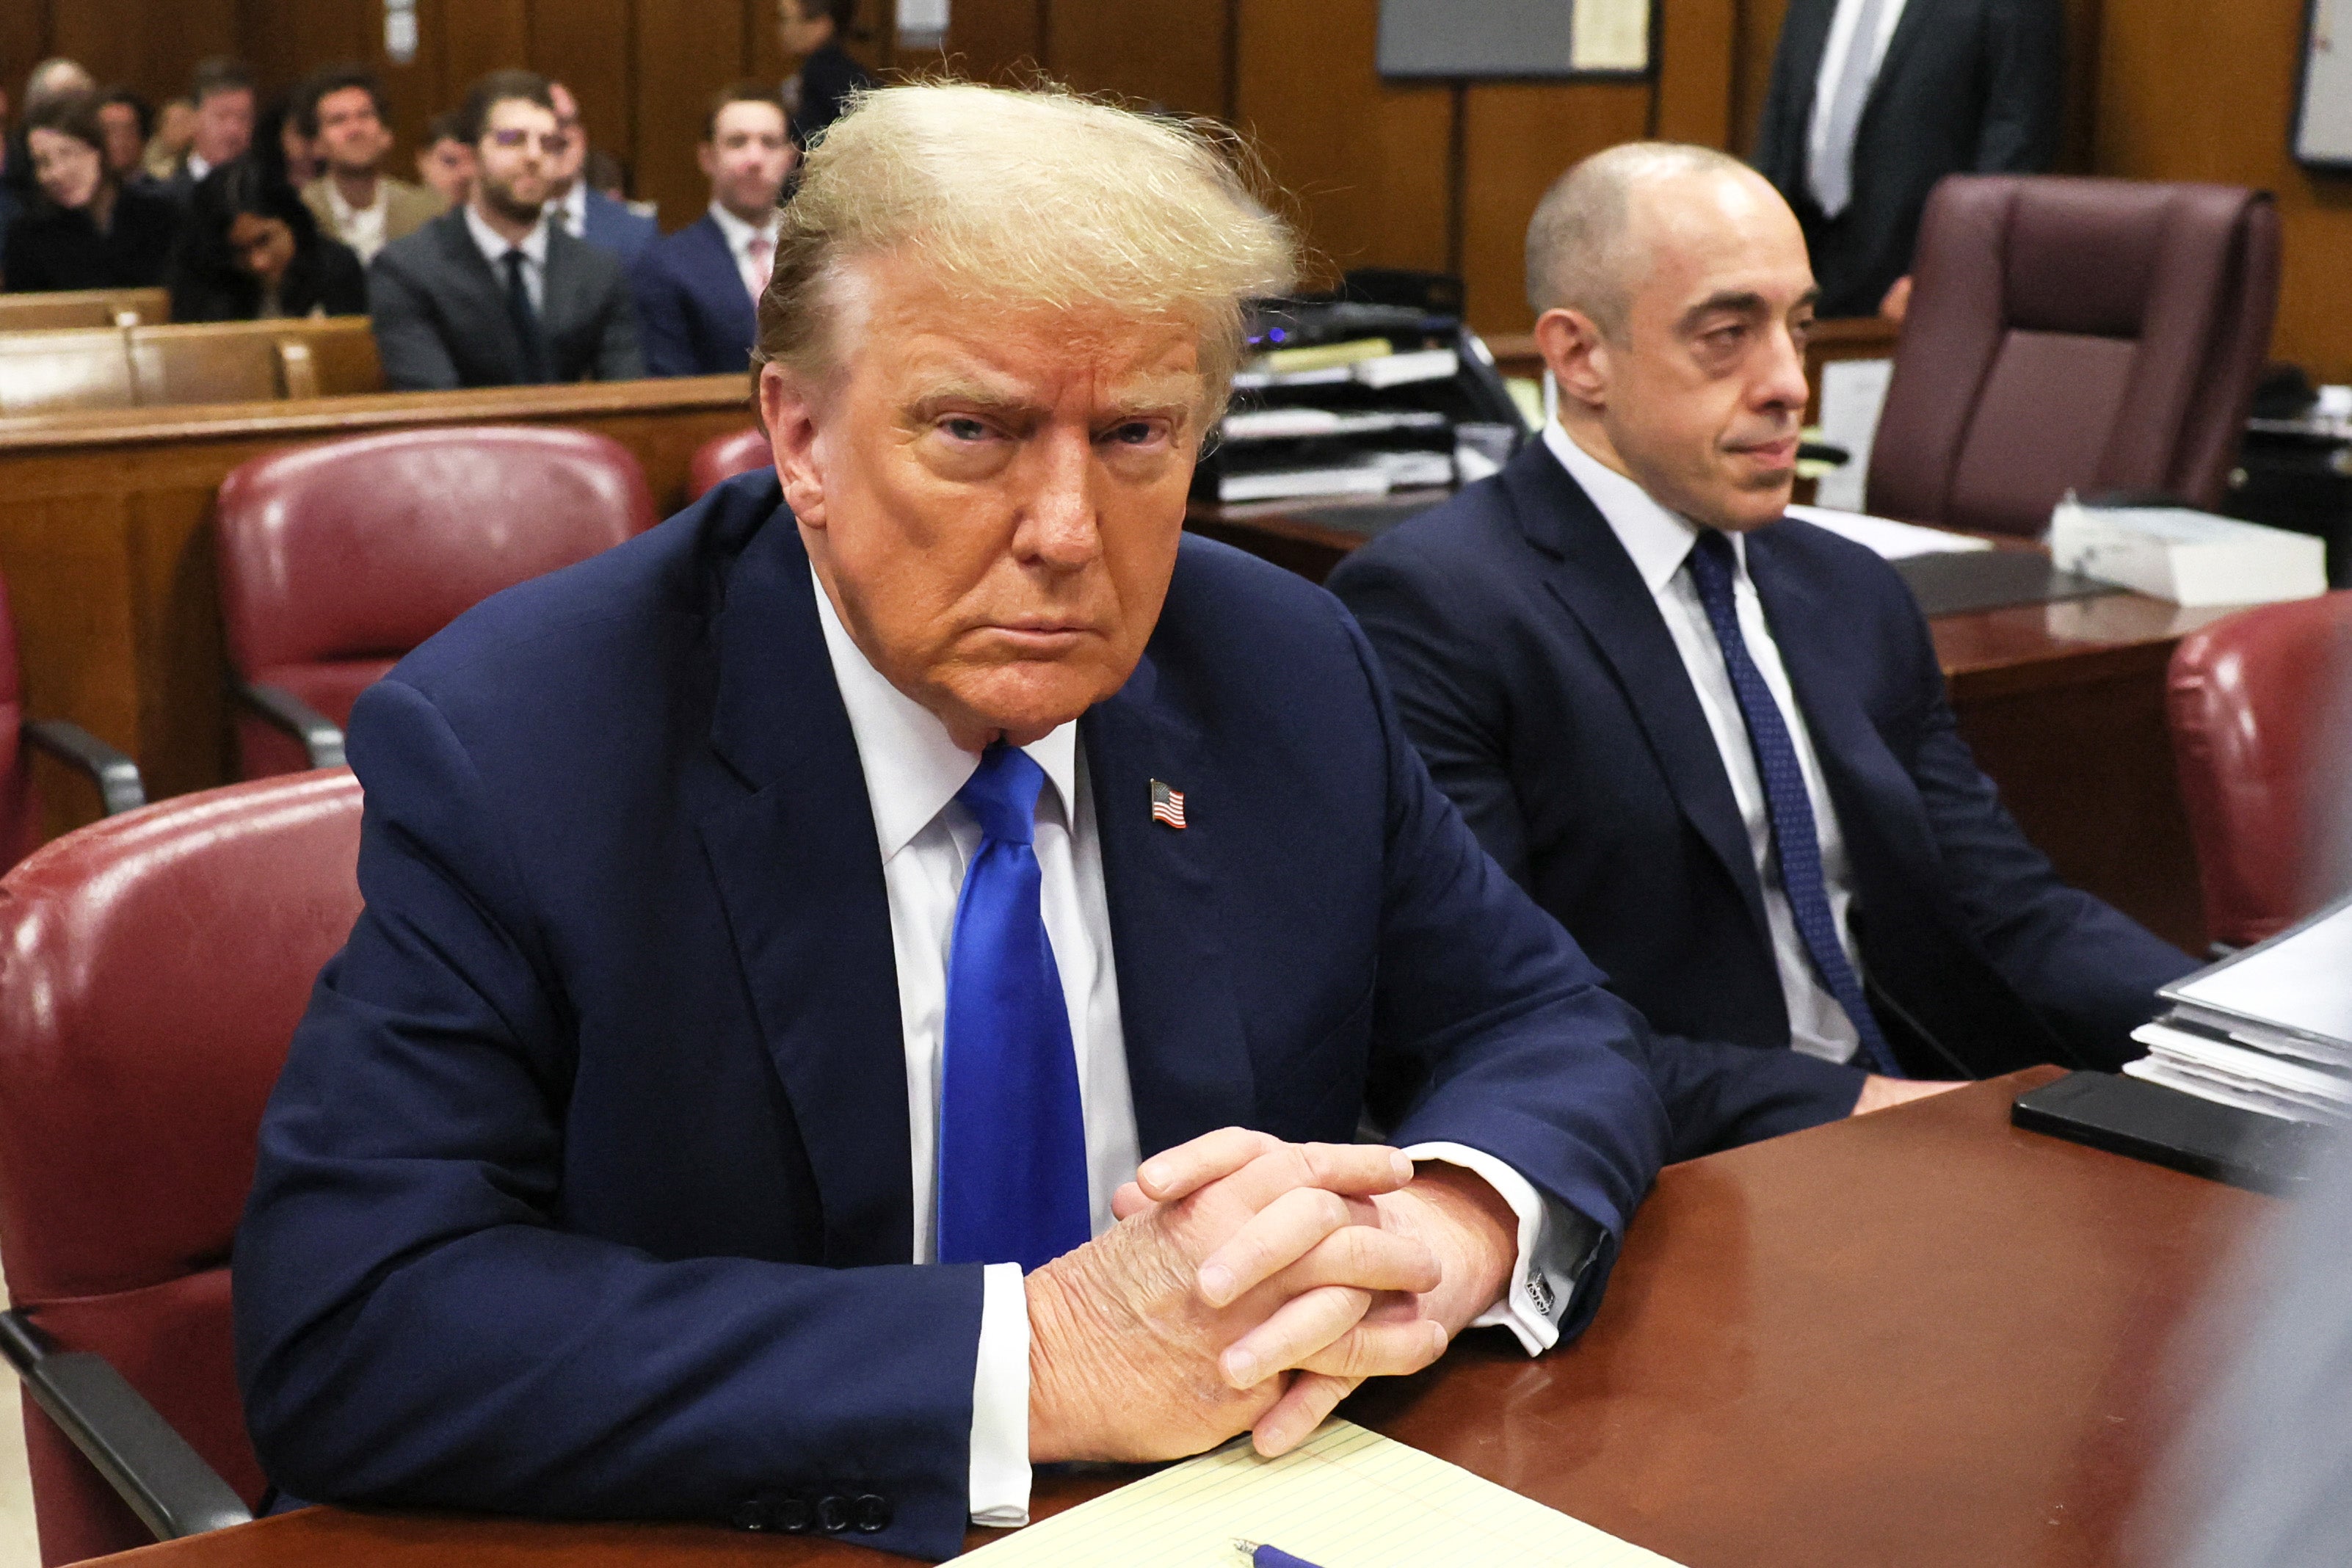 Donald Trump in court on 22 April